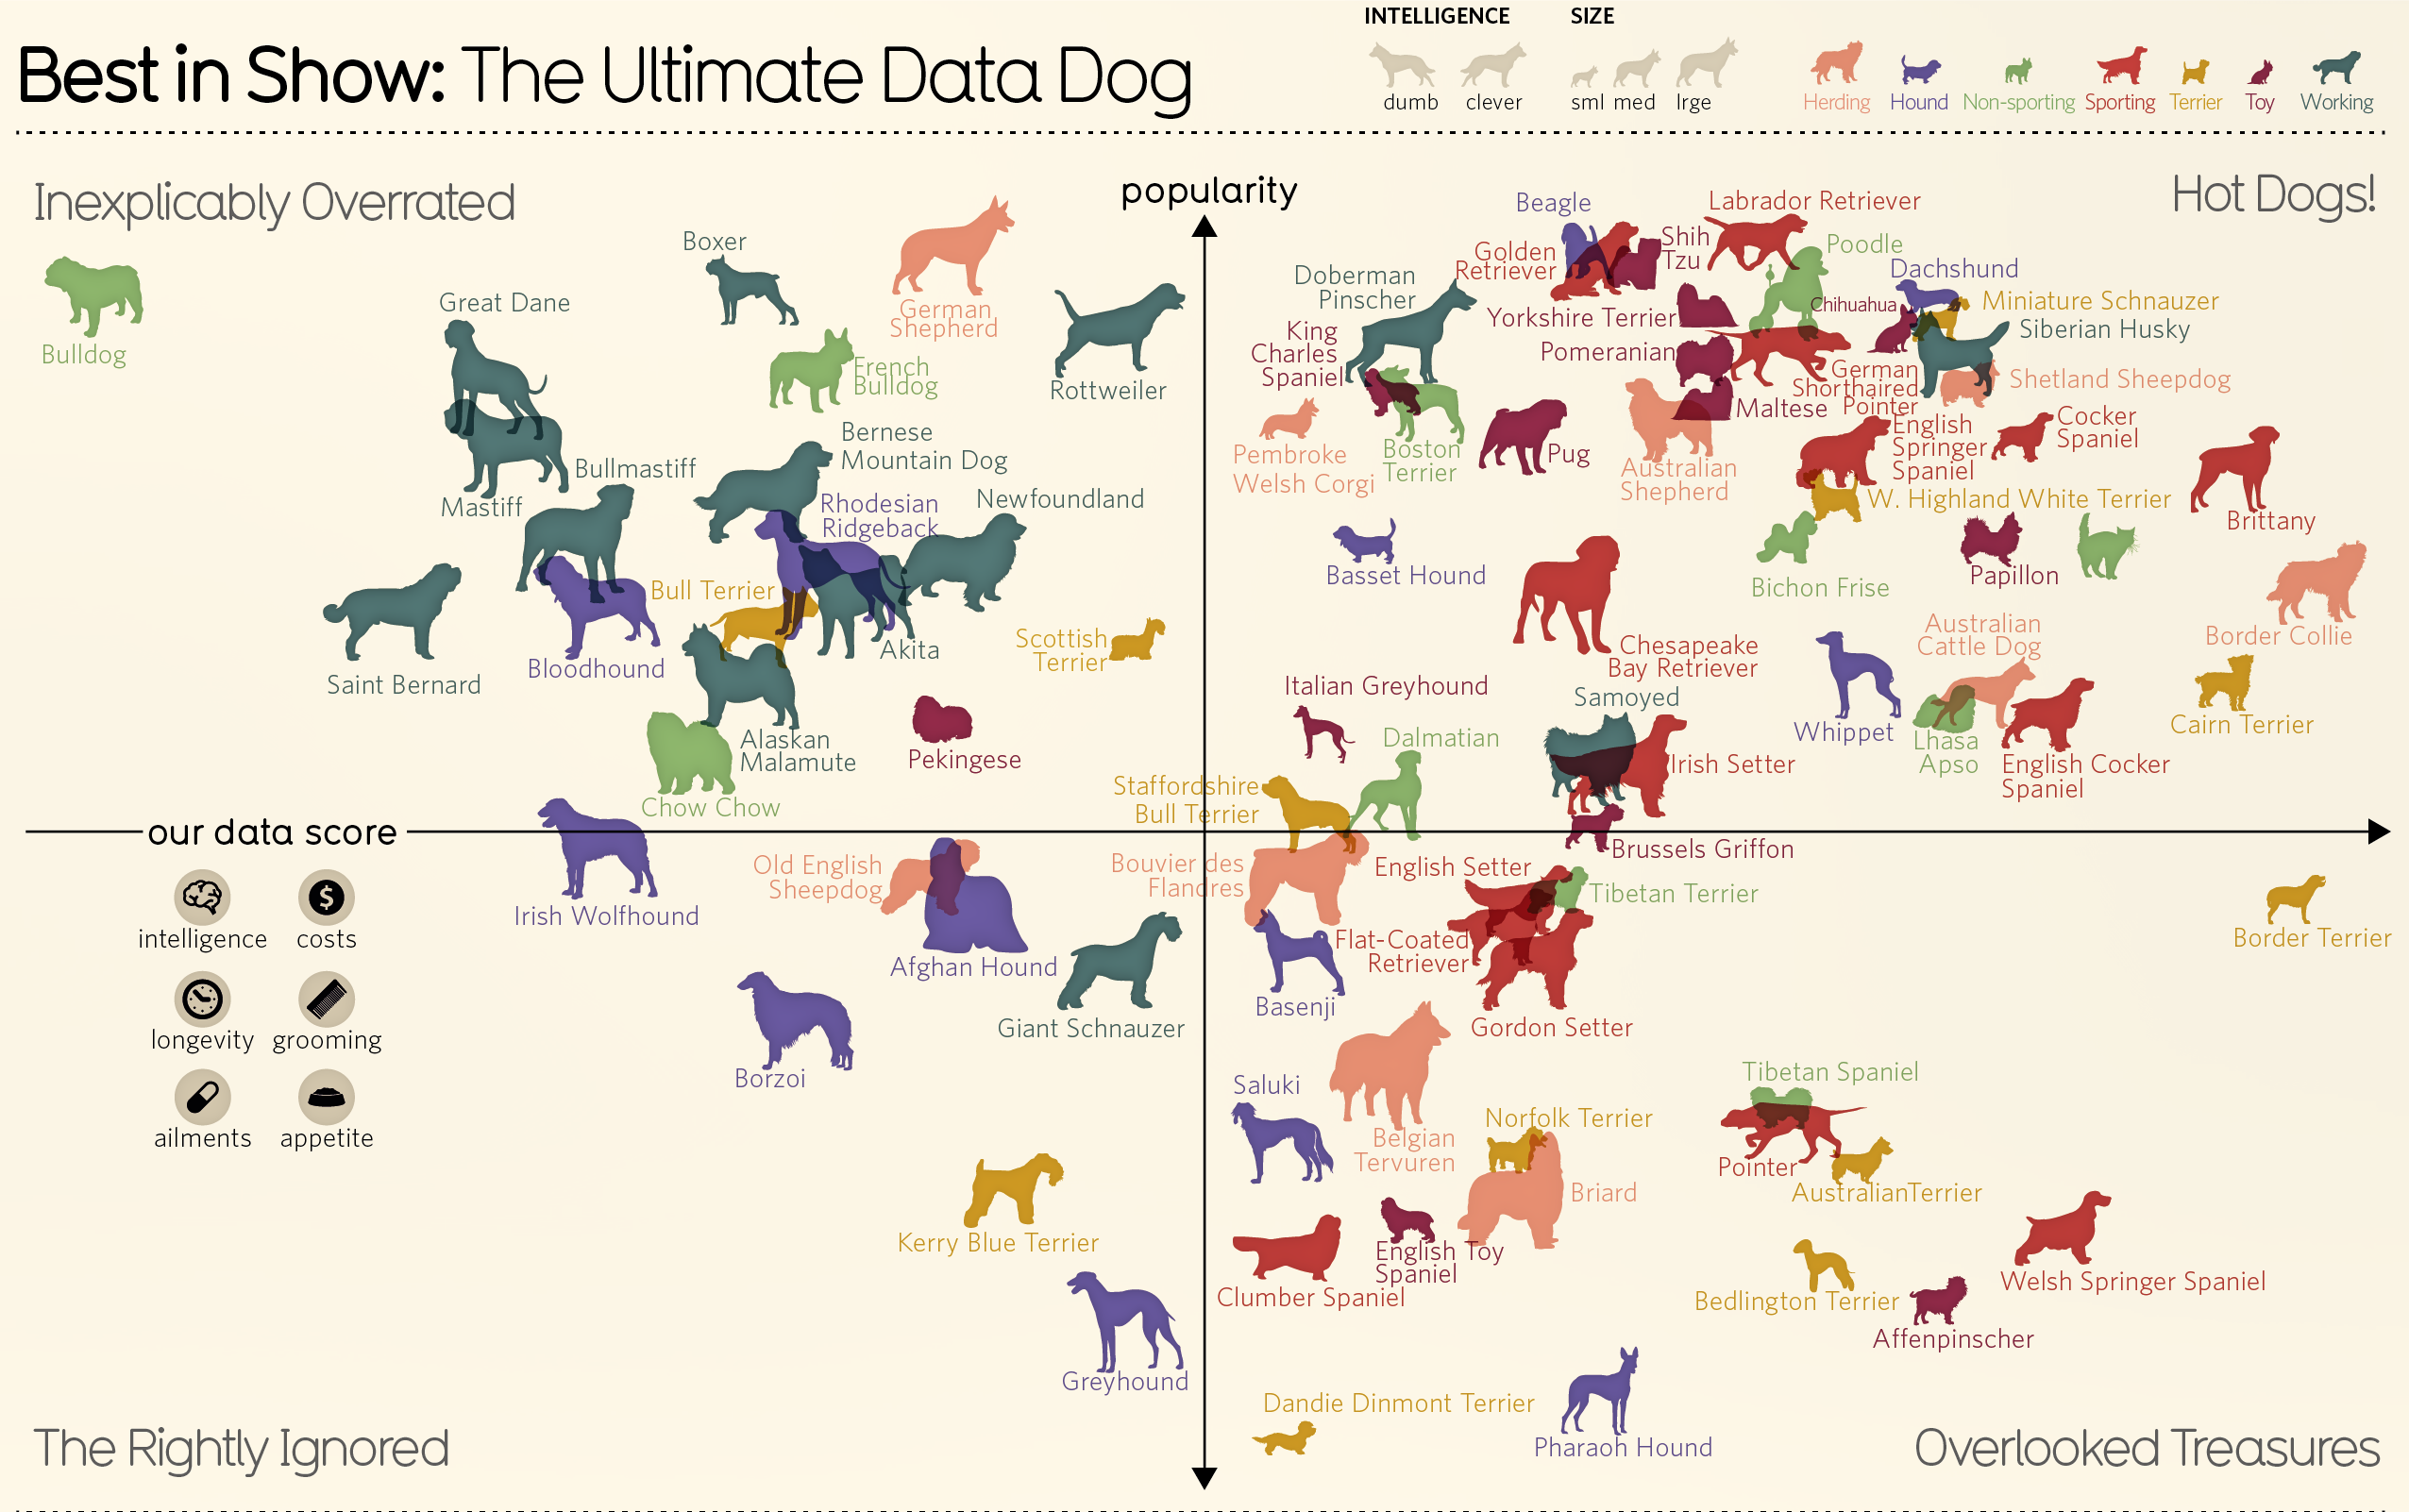 this is an informative graph about the different type of dog breeds